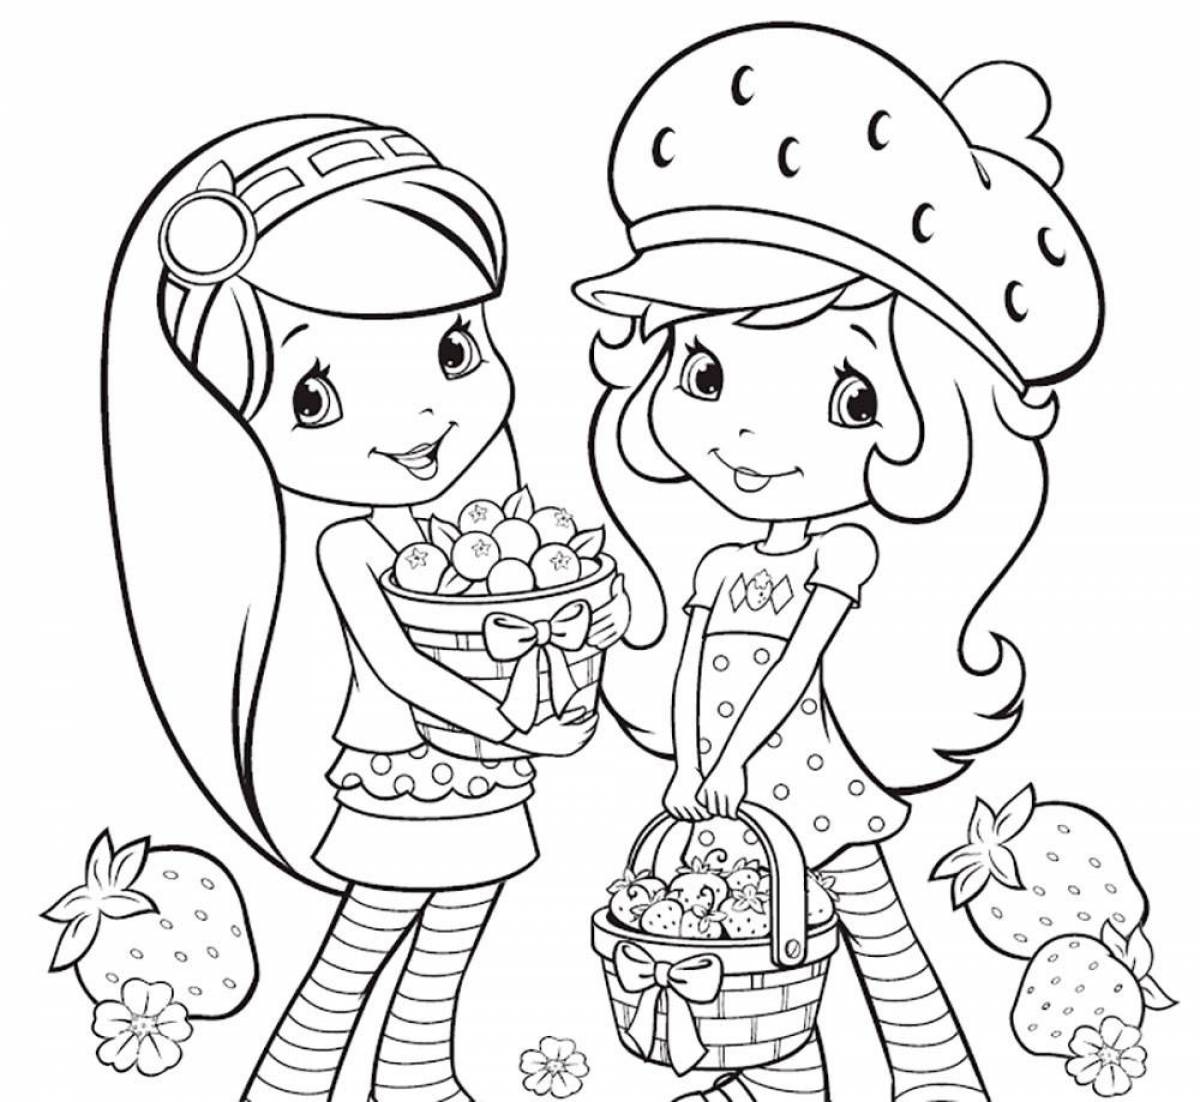 Fairytale coloring book for girls 5-6 years old